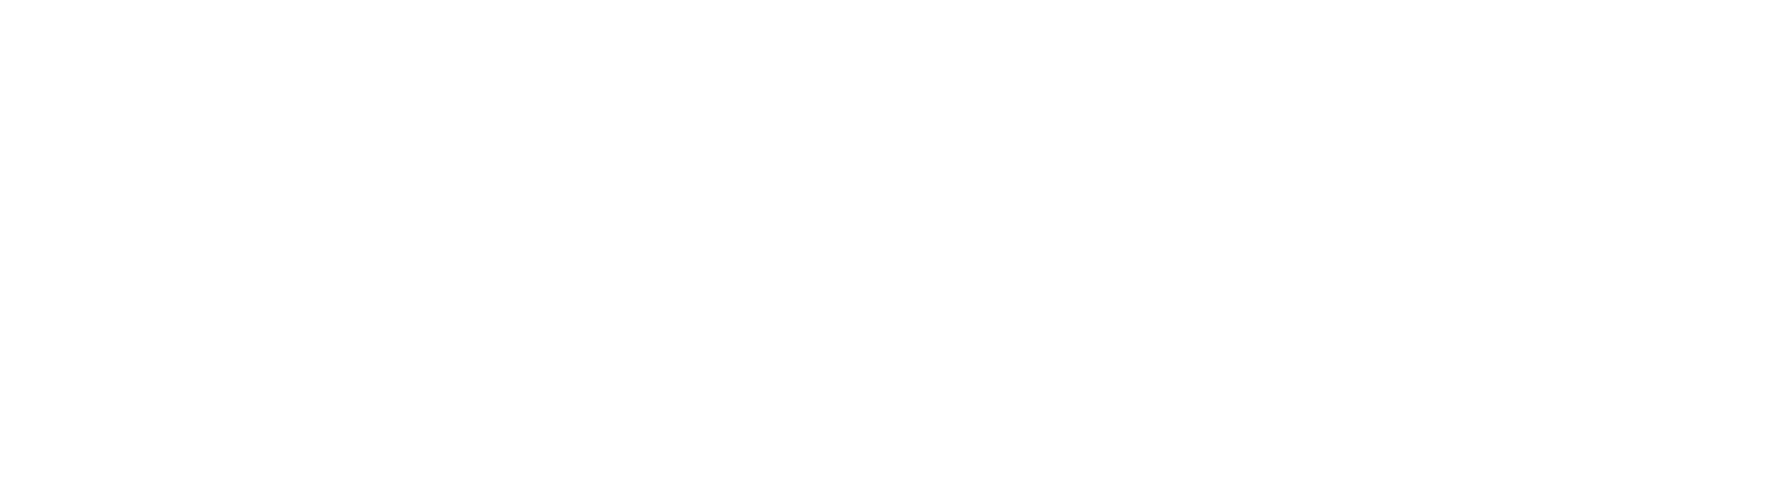 Connect Xperience logo with bug